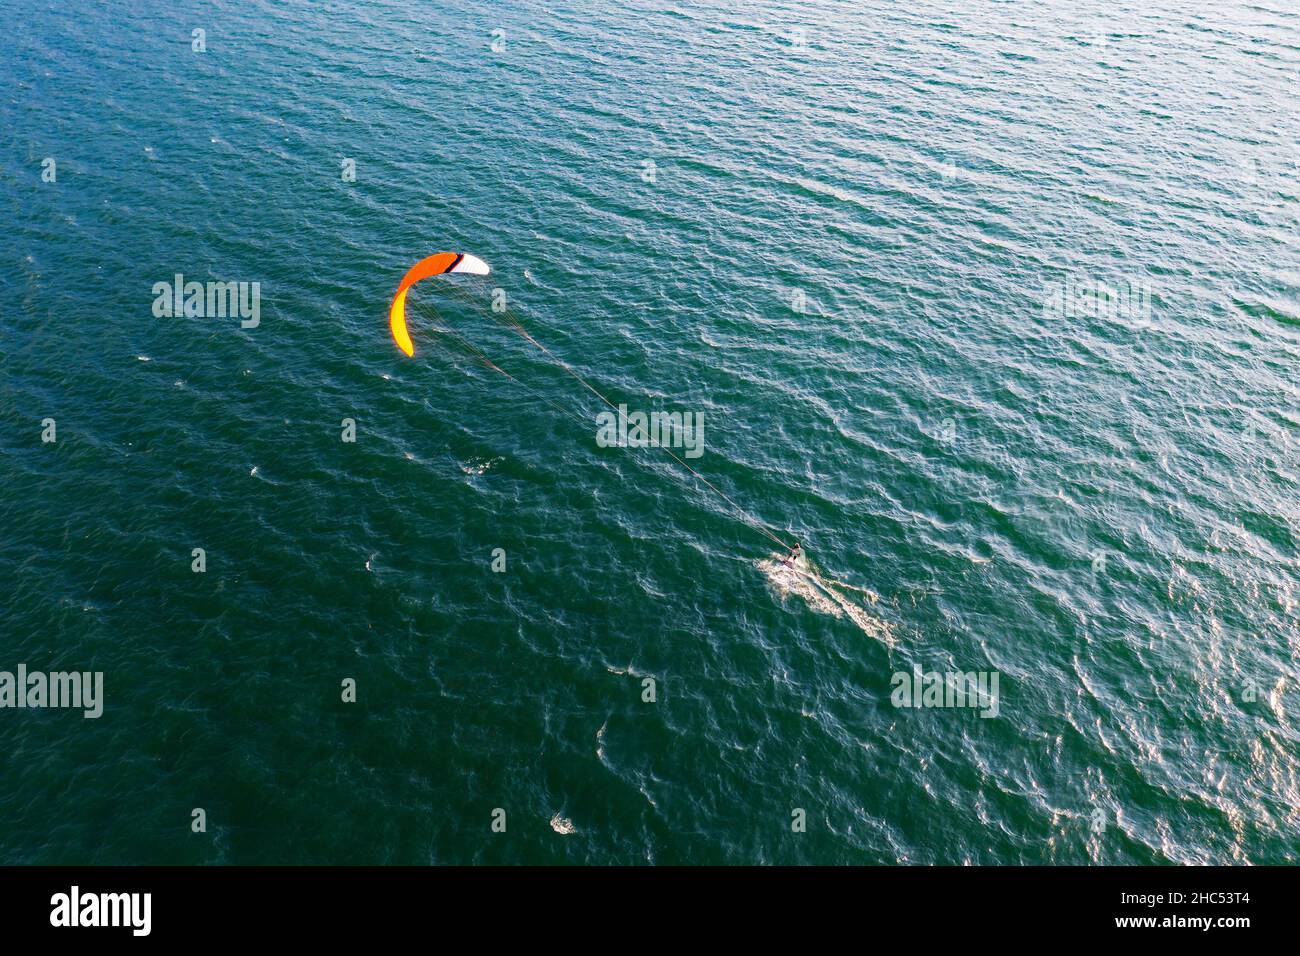 kitesurfer in action, aerial view Stock Photo